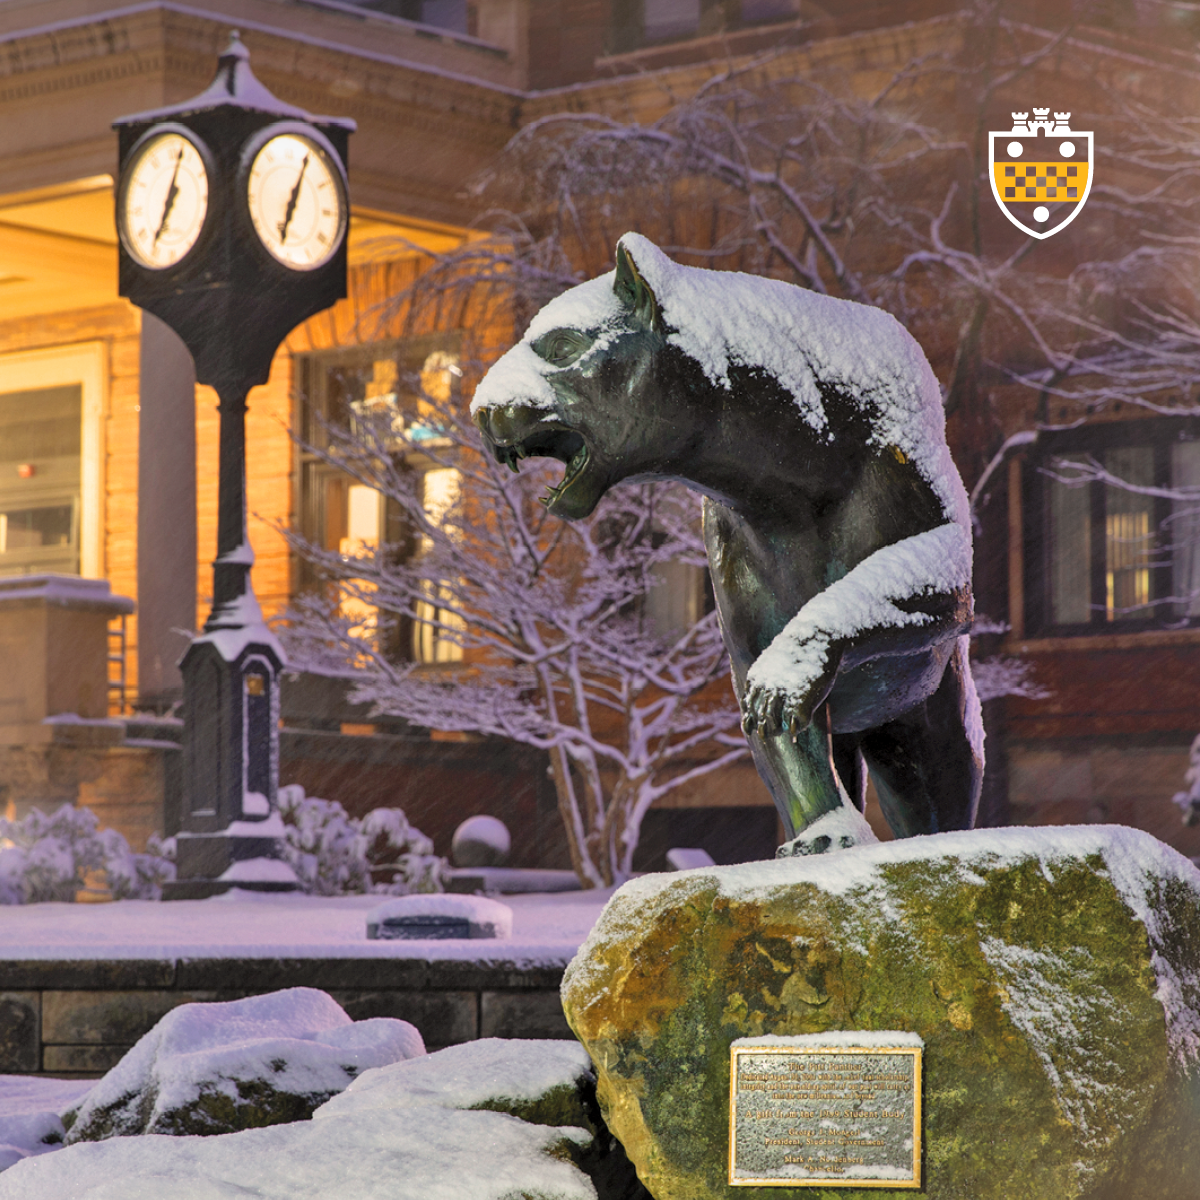 Snow on Campus Panther Statue